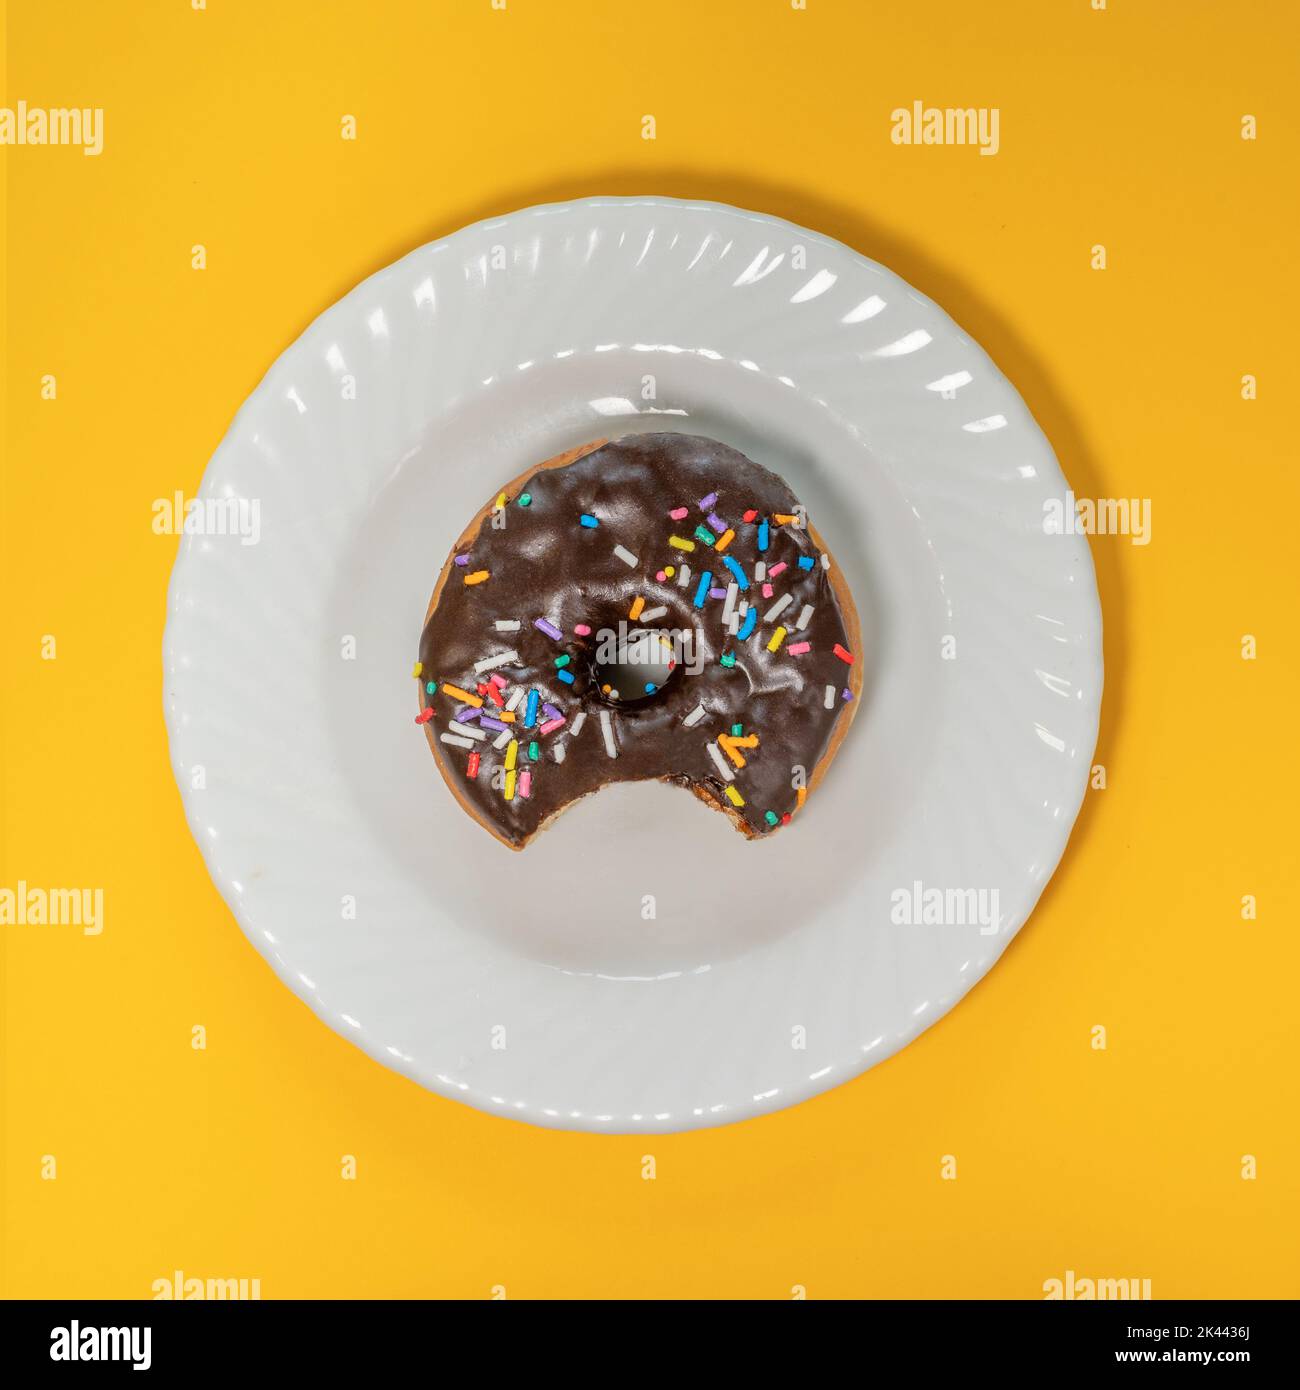 Overhead view of eaten donut with chocolate icing and sprinkles on white plate Stock Photo